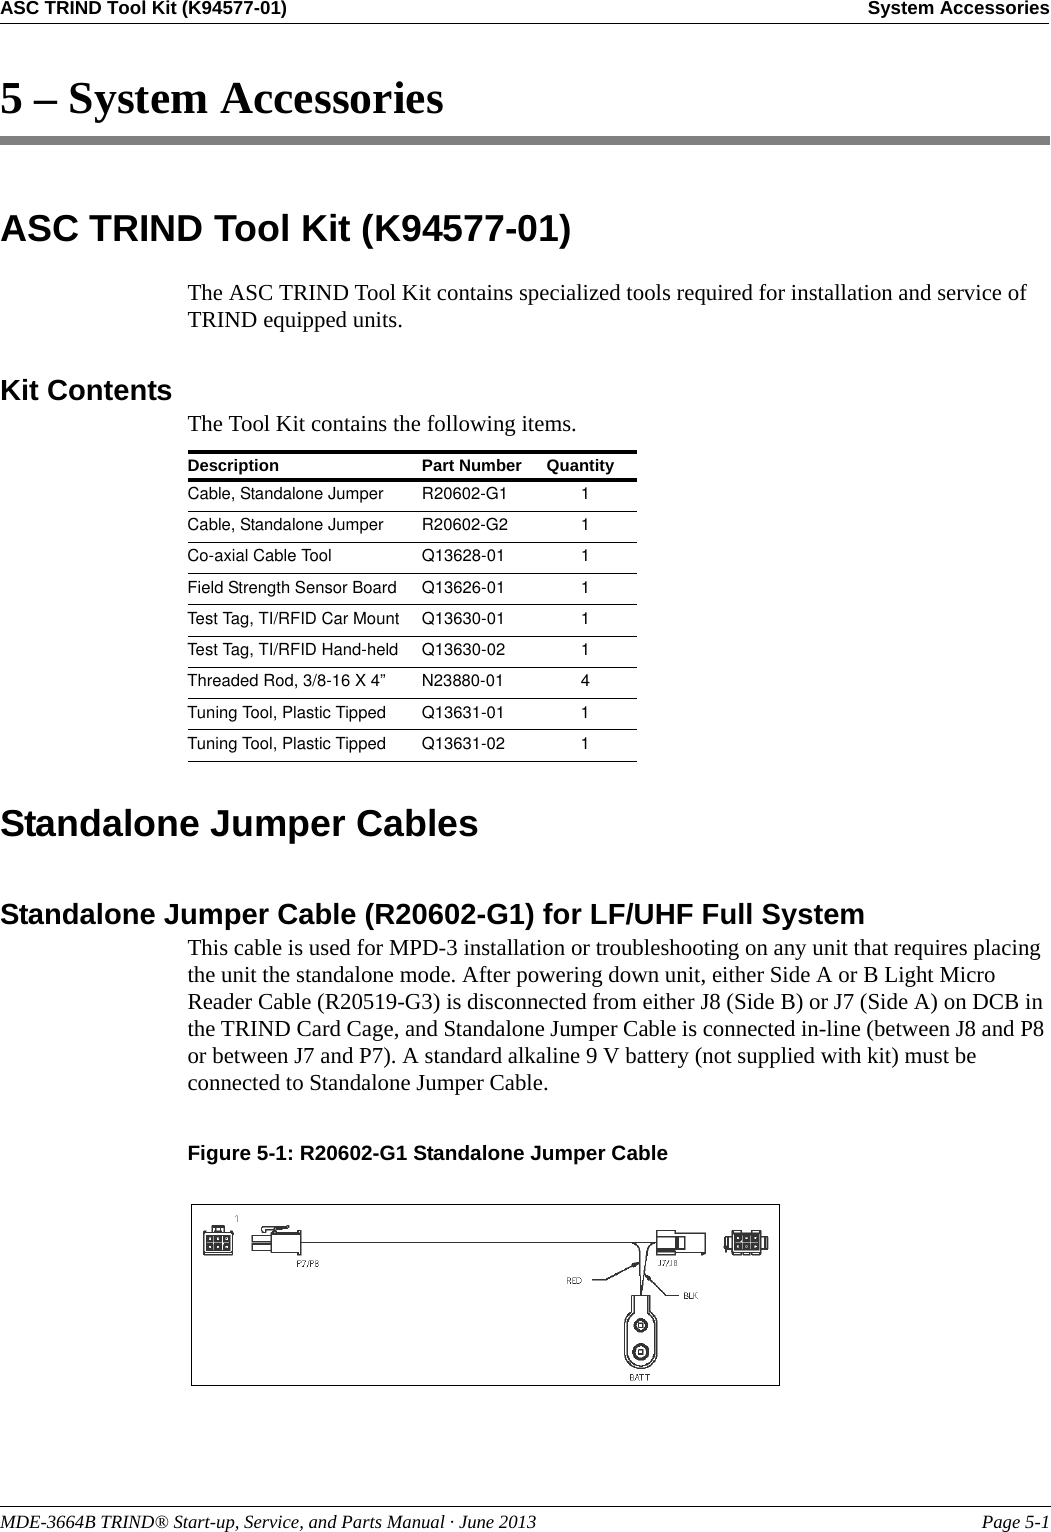 MDE-3664B TRIND® Start-up, Service, and Parts Manual · June 2013 Page 5-1ASC TRIND Tool Kit (K94577-01) System Accessories5 – System AccessoriesASC TRIND Tool Kit (K94577-01)The ASC TRIND Tool Kit contains specialized tools required for installation and service of TRIND equipped units.Kit ContentsThe Tool Kit contains the following itemsDescription Part Number Quantity Cable, Standalone Jumper R20602-G1 1Cable, Standalone Jumper R20602-G2 1Co-axial Cable Tool Q13628-01 1Field Strength Sensor Board Q13626-01 1Test Tag, TI/RFID Car Mount Q13630-01 1Test Tag, TI/RFID Hand-held Q13630-02 1Threaded Rod, 3/8-16 X 4” N23880-01 4Tuning Tool, Plastic Tipped Q13631-01 1Tuning Tool, Plastic Tipped Q13631-02 1.Standalone Jumper CablesStandalone Jumper Cable (R20602-G1) for LF/UHF Full SystemThis cable is used for MPD-3 installation or troubleshooting on any unit that requires placing the unit the standalone mode. After powering down unit, either Side A or B Light Micro Reader Cable (R20519-G3) is disconnected from either J8 (Side B) or J7 (Side A) on DCB in the TRIND Card Cage, and Standalone Jumper Cable is connected in-line (between J8 and P8 or between J7 and P7). A standard alkaline 9 V battery (not supplied with kit) must be connected to Standalone Jumper Cable.Figure 5-1: R20602-G1 Standalone Jumper Cable 